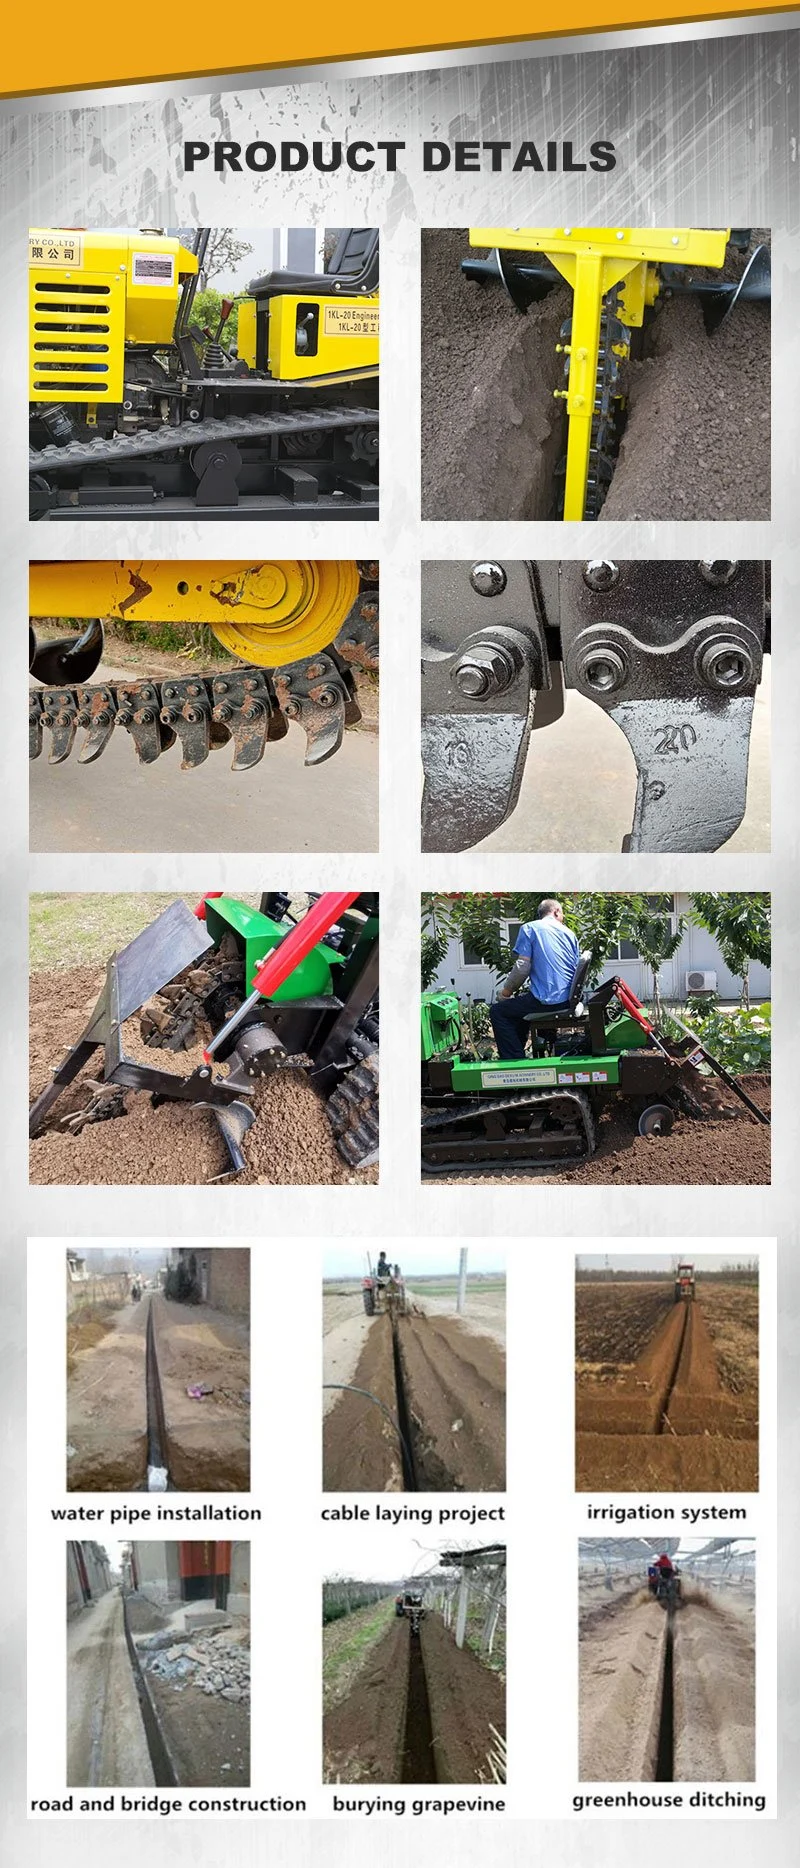 Made in China Garden Agricultural Tractor Hydraulic Agriculture Trencher Machine with 150mm Wide Chain